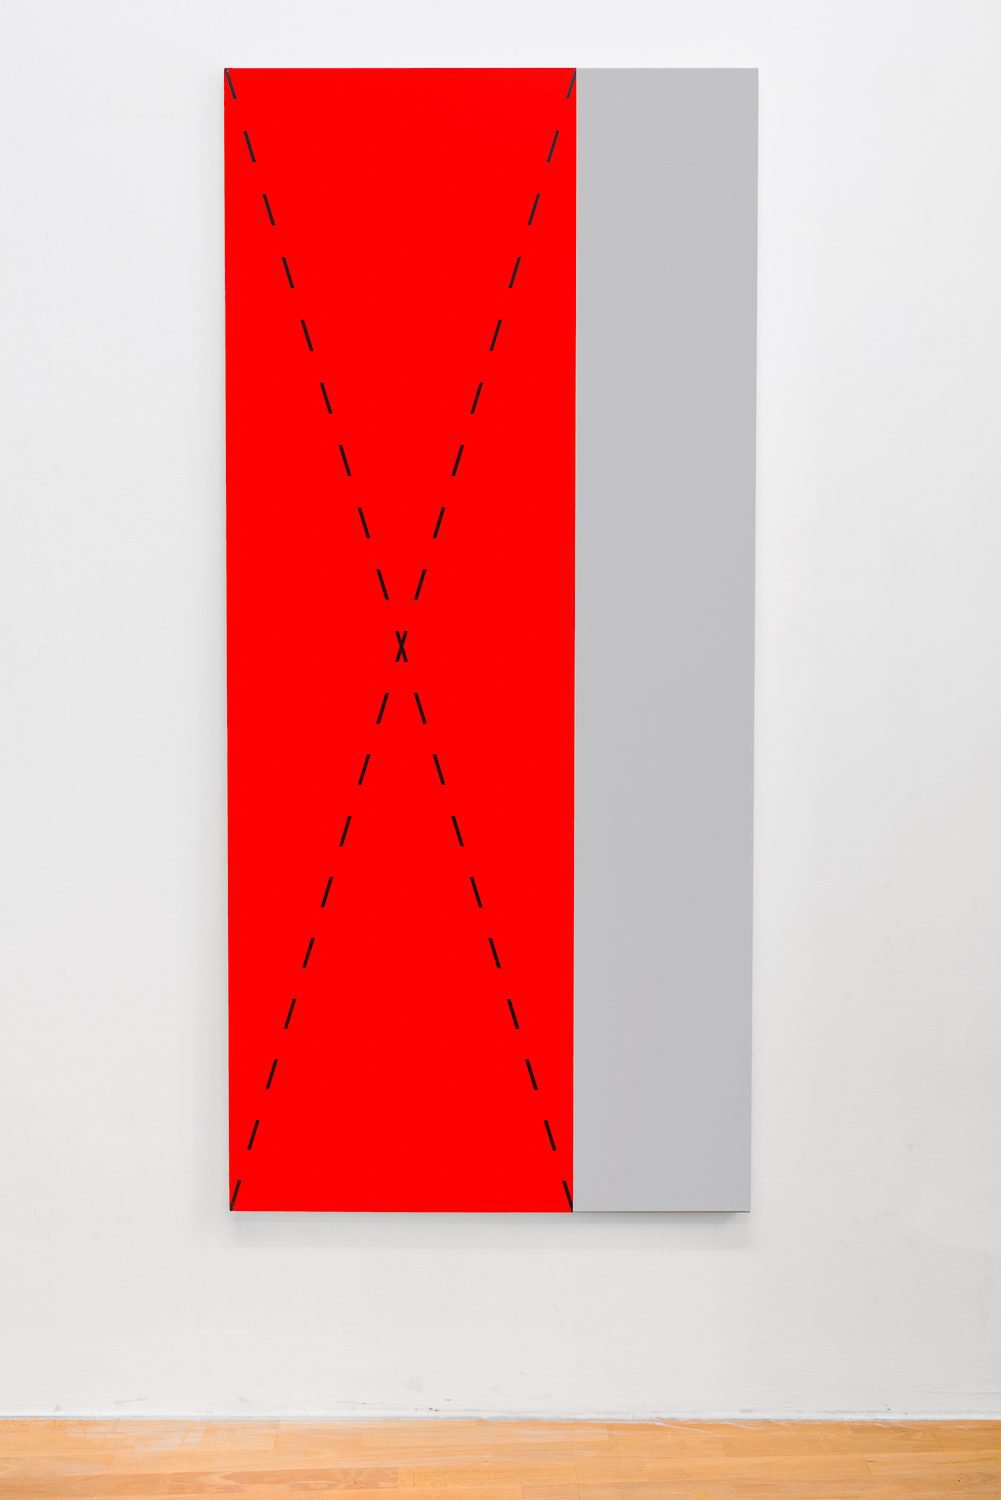 Nick OberthalerUntitled (comfortable cut #2), 2017Gesso and acrylics on canvas/linen185 x 85 cm